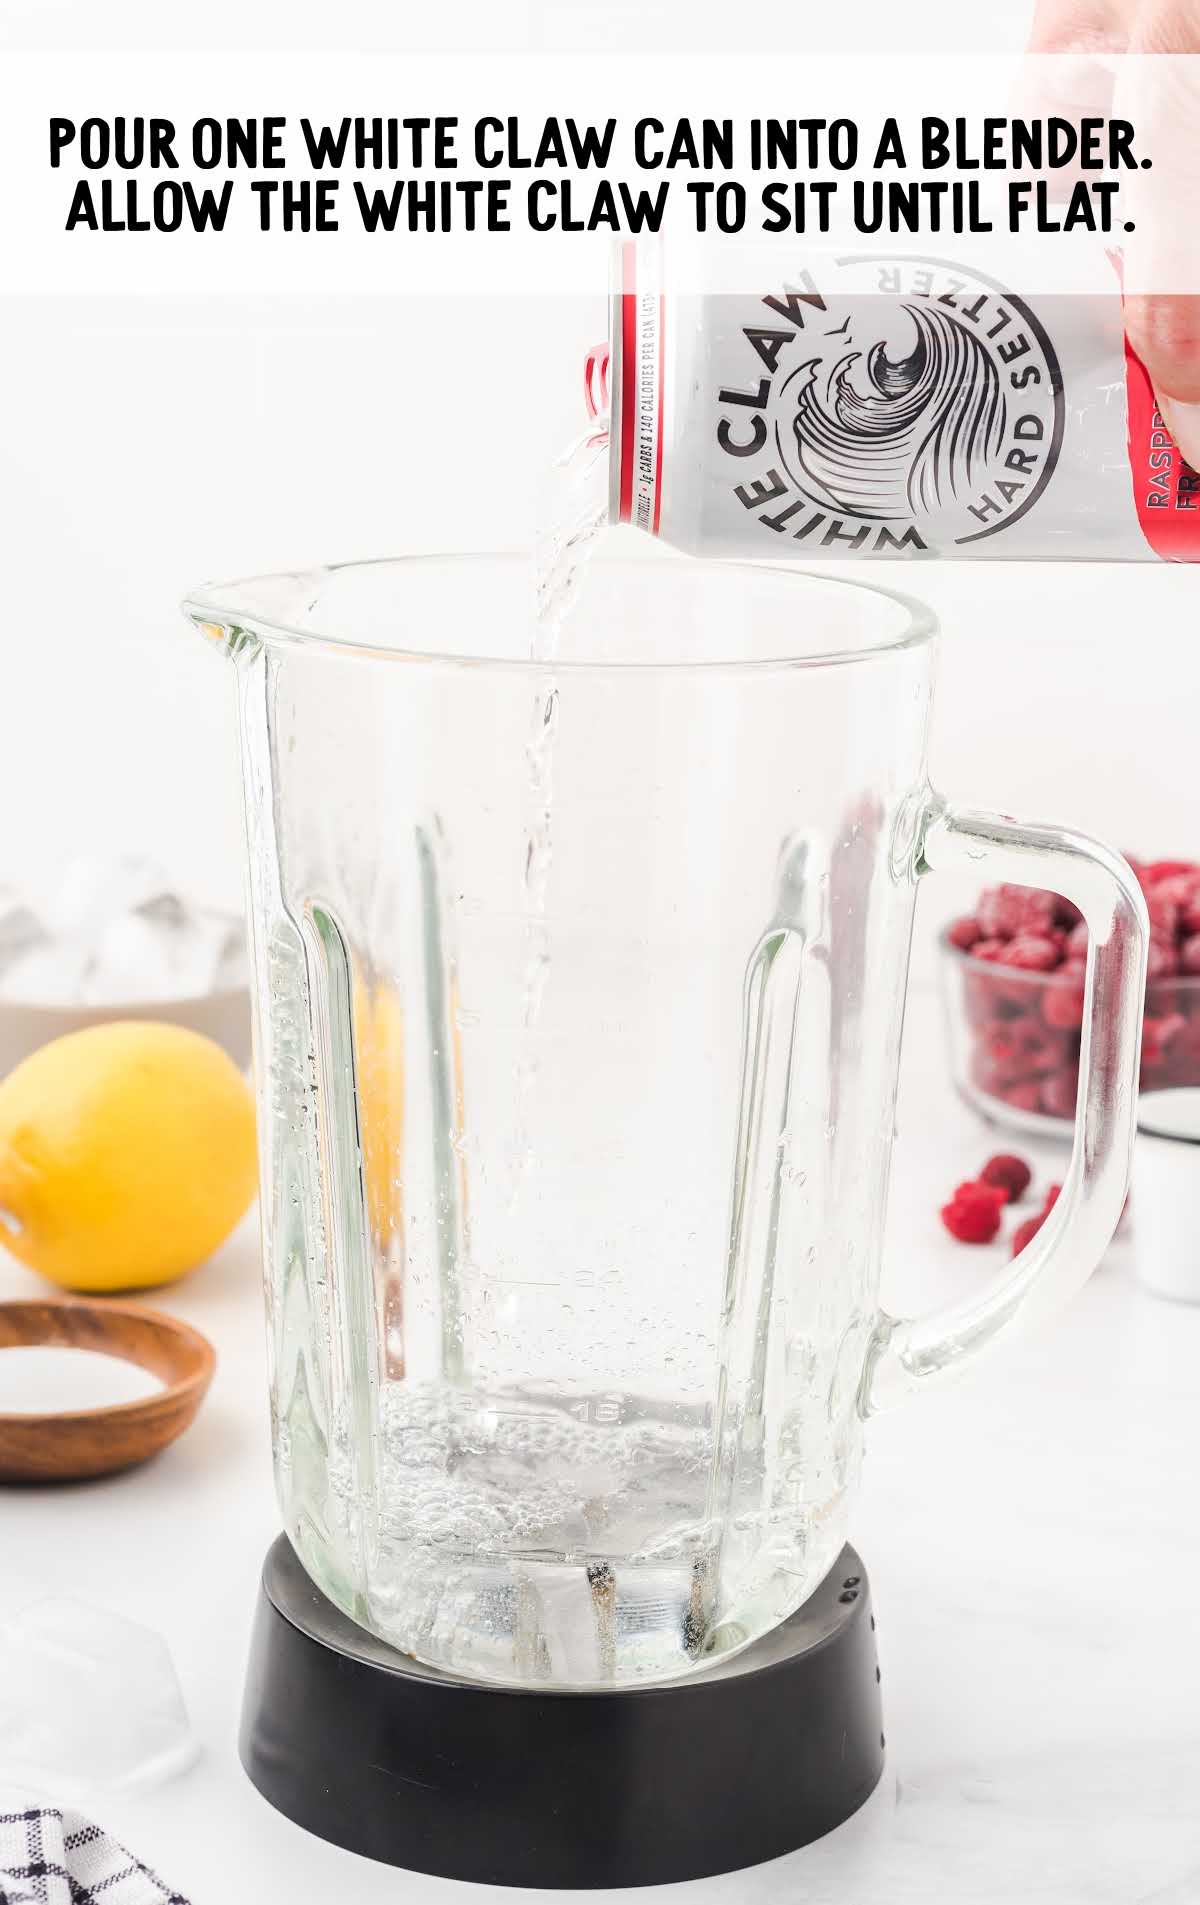 white claw being poured into a blender